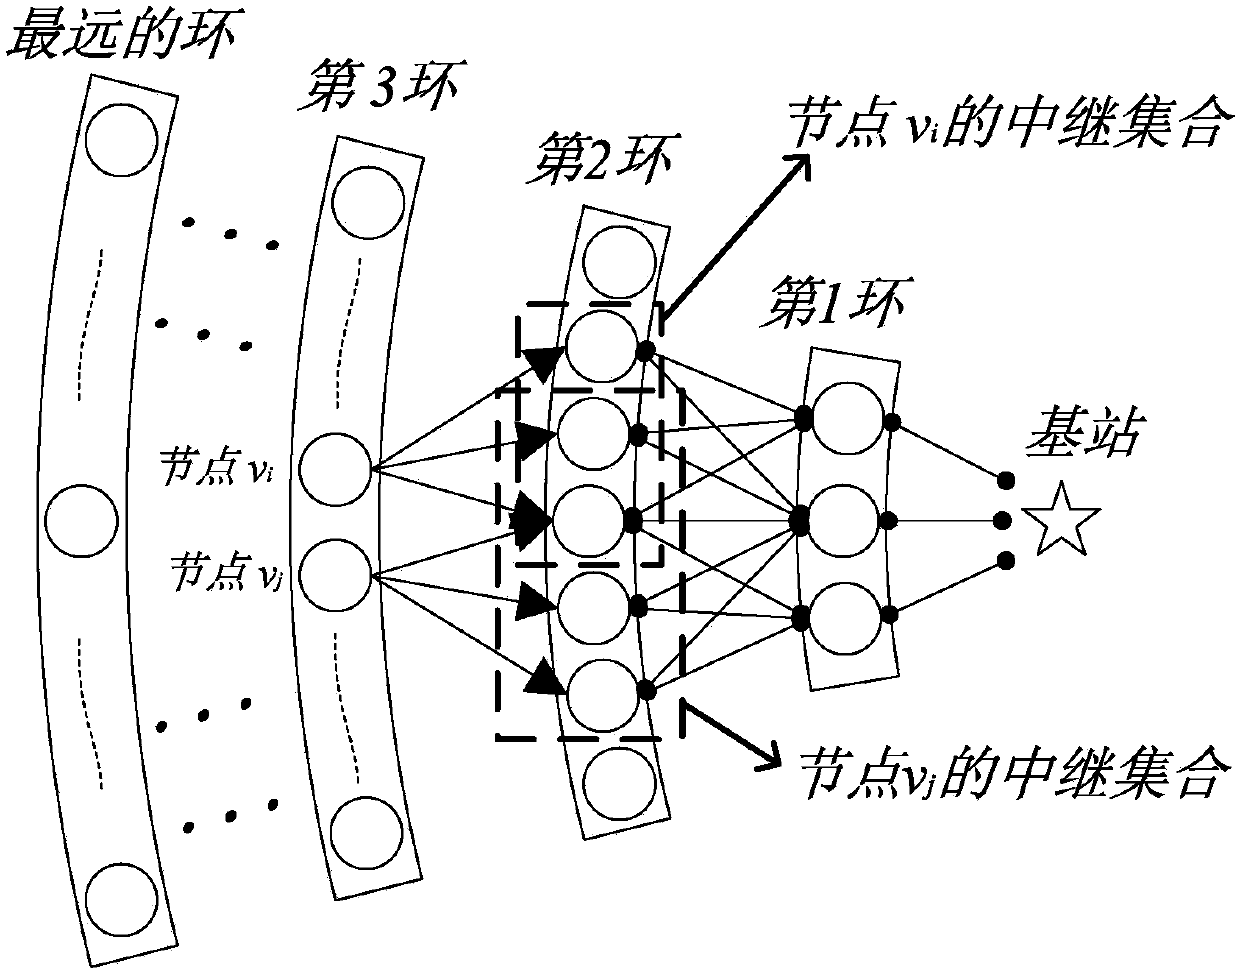 Data Transmission Scheduling Method Based on Unequal Relay Sets in Wireless Sensor Networks